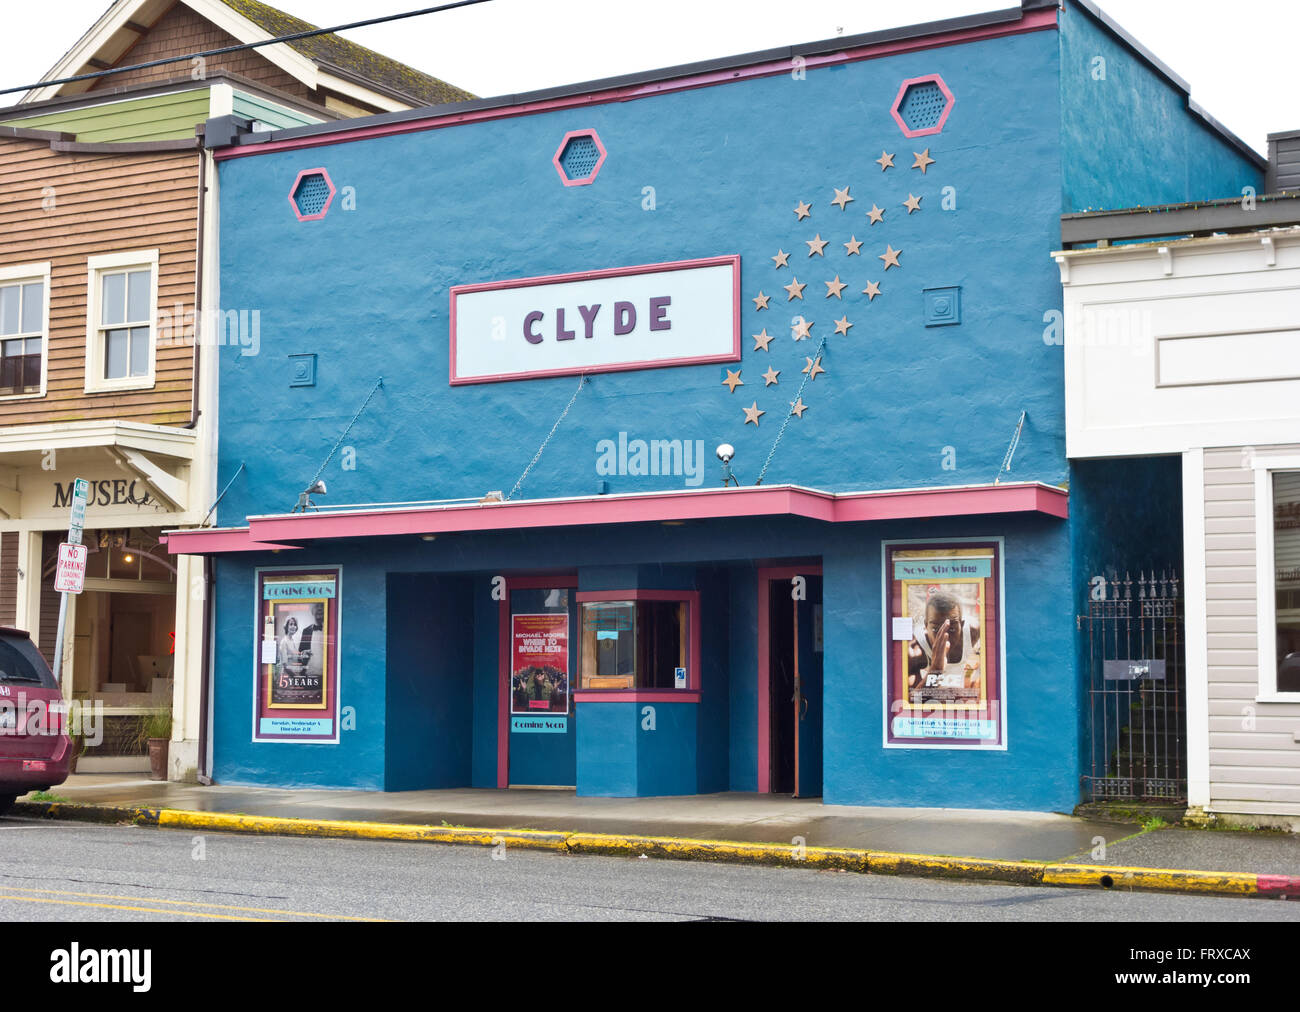 Movie Theater Exterior High Resolution Stock Photography And Images - Alamy